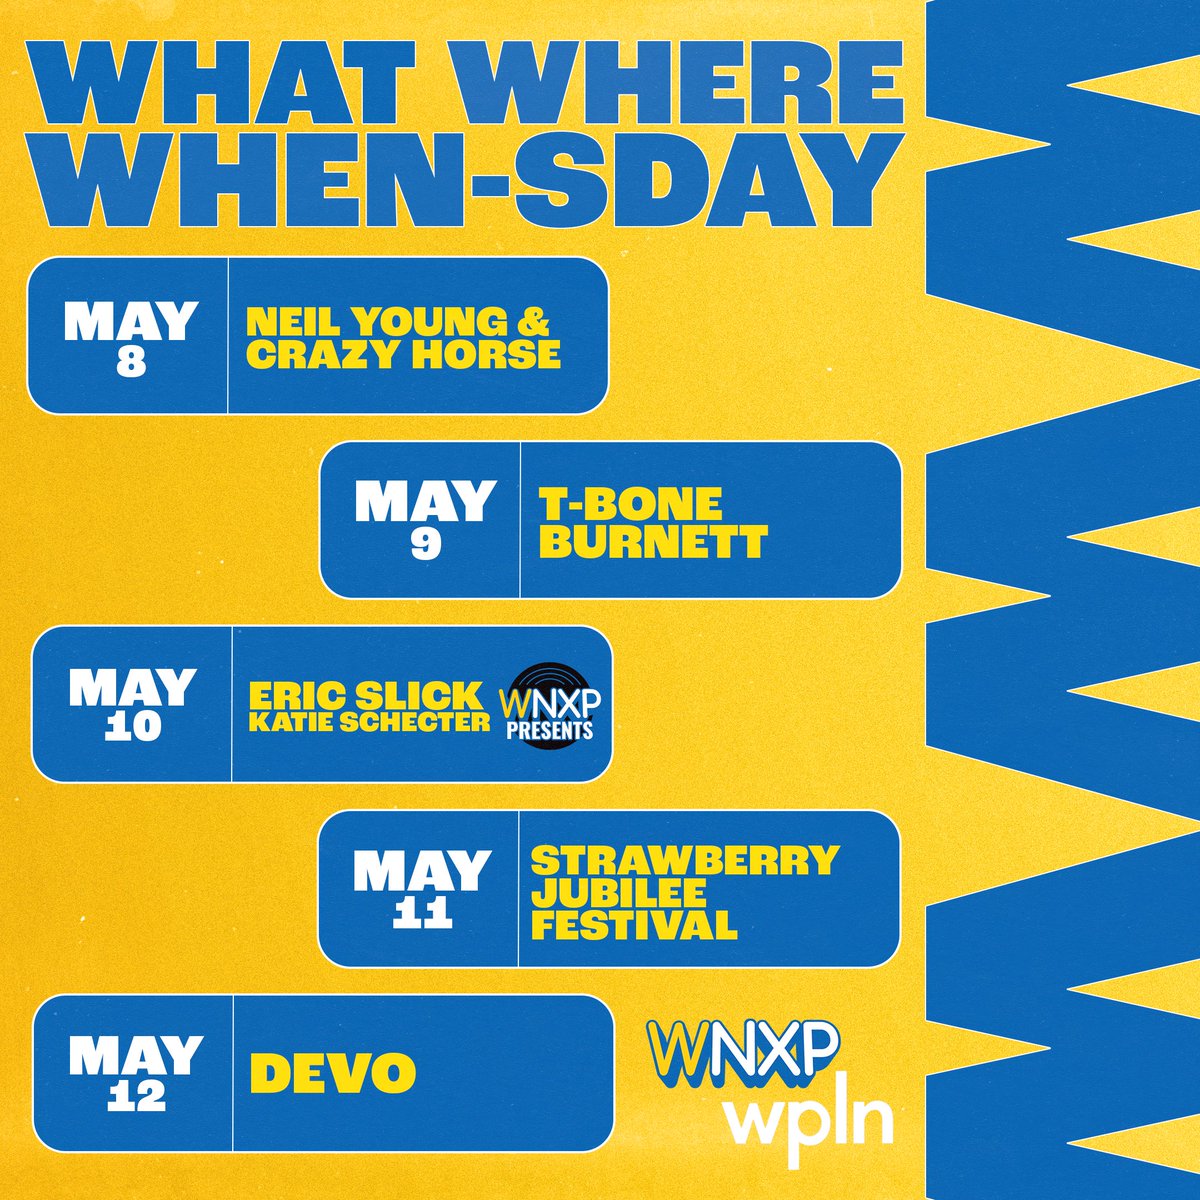 Today's What Where When-sday, we talk this weekend's Strawberry Jubilee Festival, happening Saturday at the Nashville Farmer's Market! Also this week in Nashville: @Neilyoung & Crazy Horse, T-Bone Burnett, WNXP Presents @ericslickmusic, @DEVO and more: wnxp.org/what-where-whe…